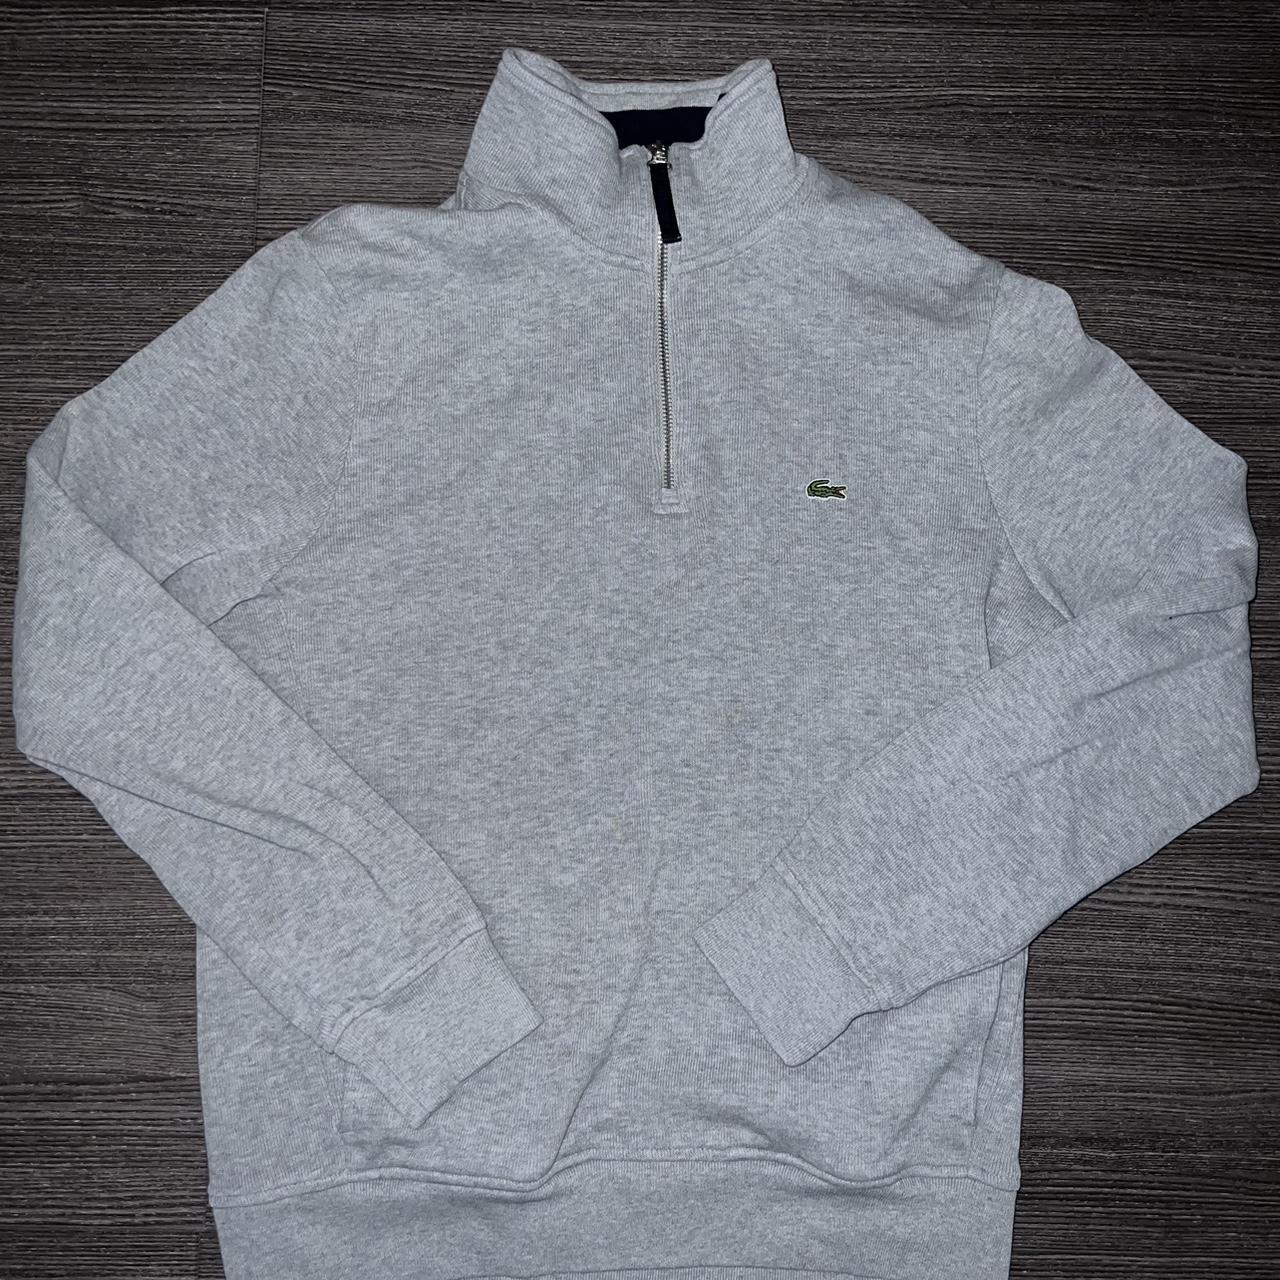 Lacoste Men's Grey and White Jumper